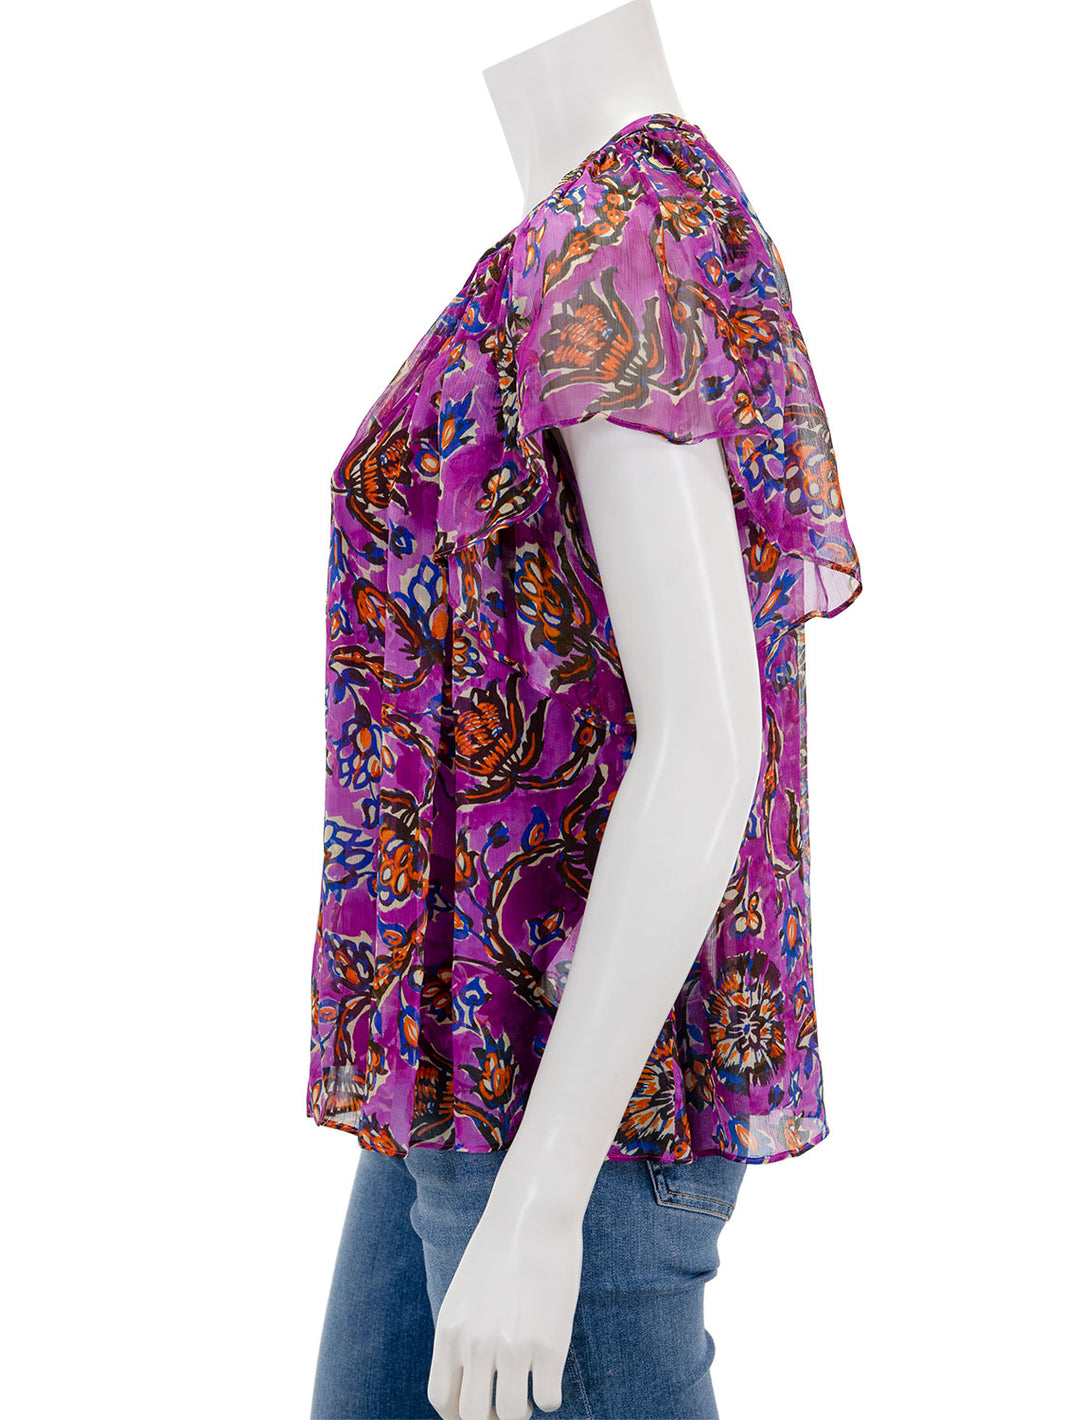 Side view of Vanessa Bruno's cantin top in violet floral.